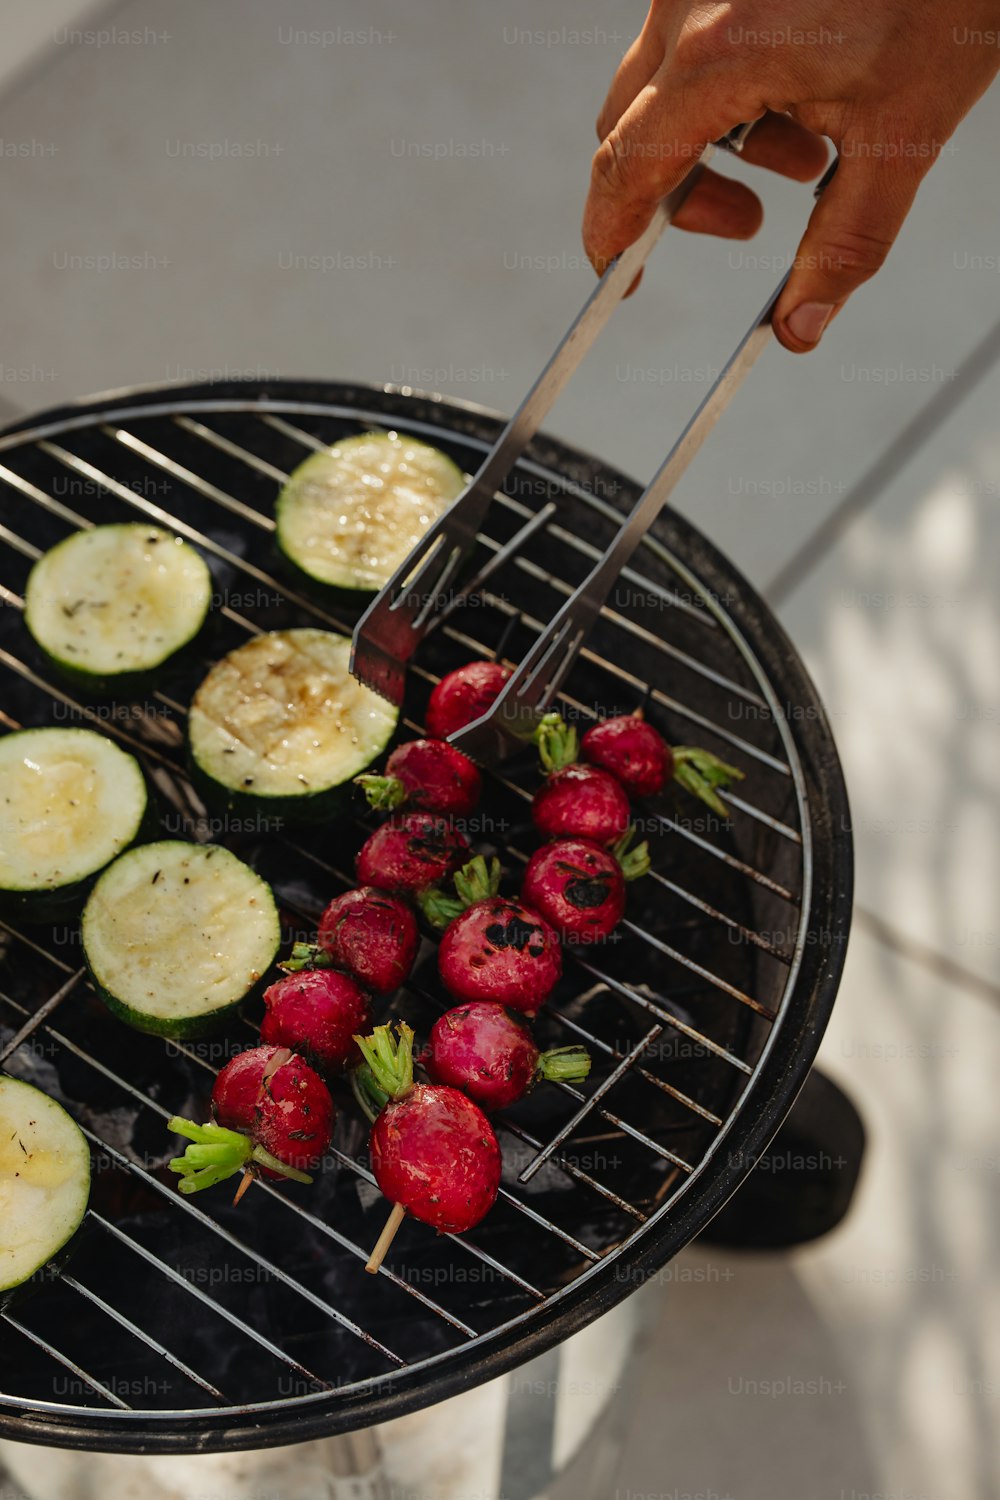 a person grilling food on a grill with strawberries and cucumbers